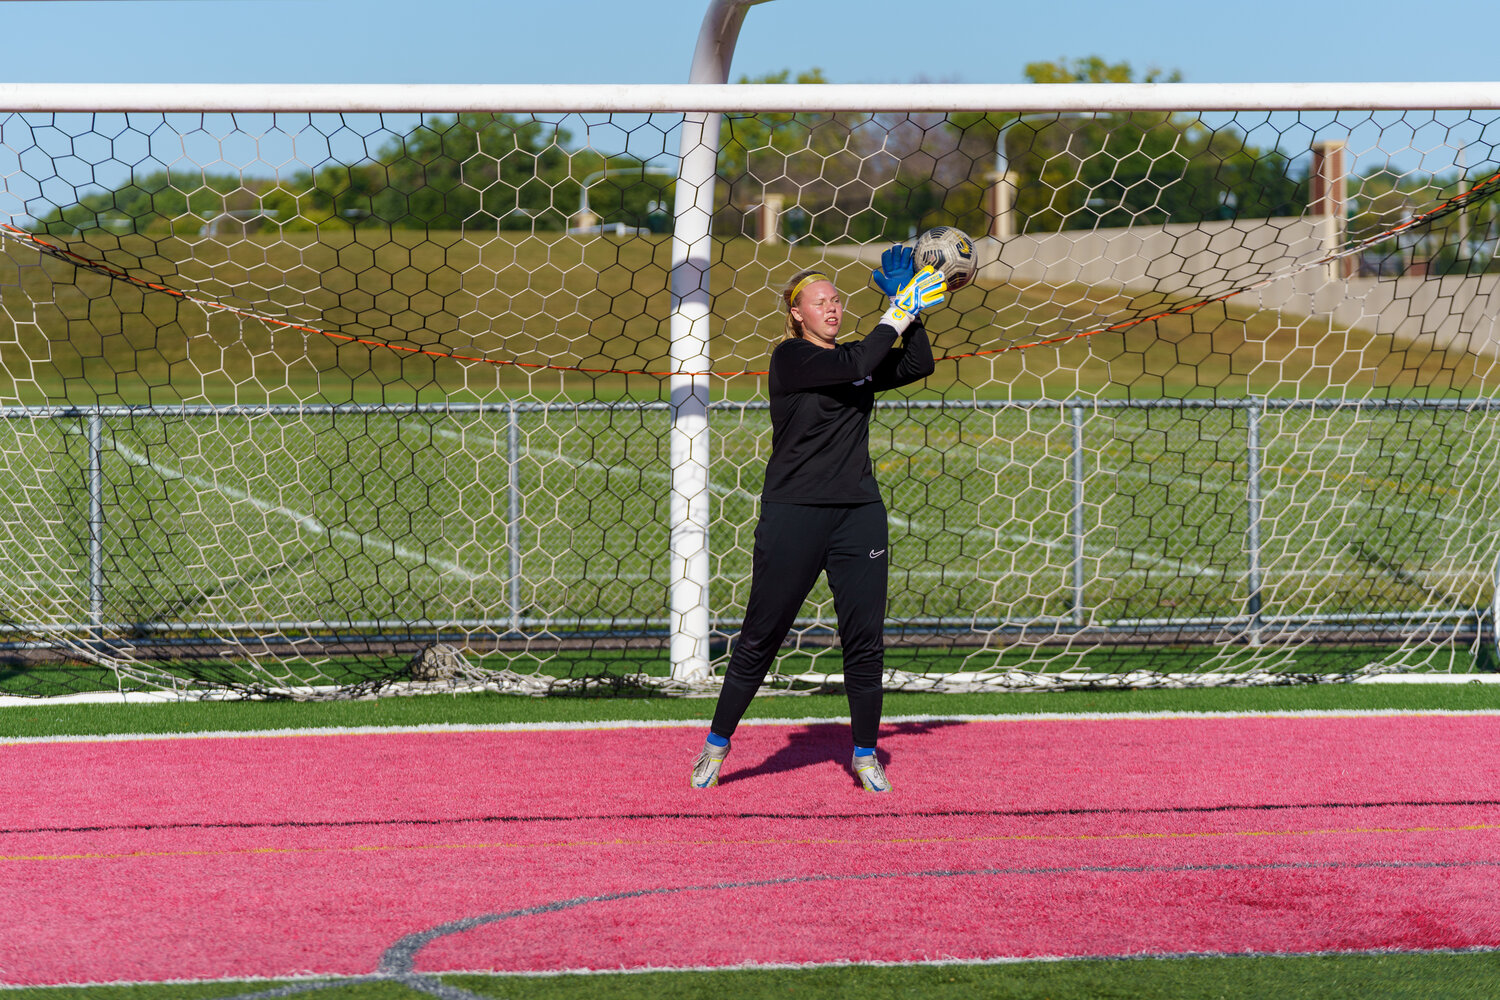 Raider keeper Riley Mancl did not have a lot of action during the game. Thankfully, we were able to get some great shots of her warming up.